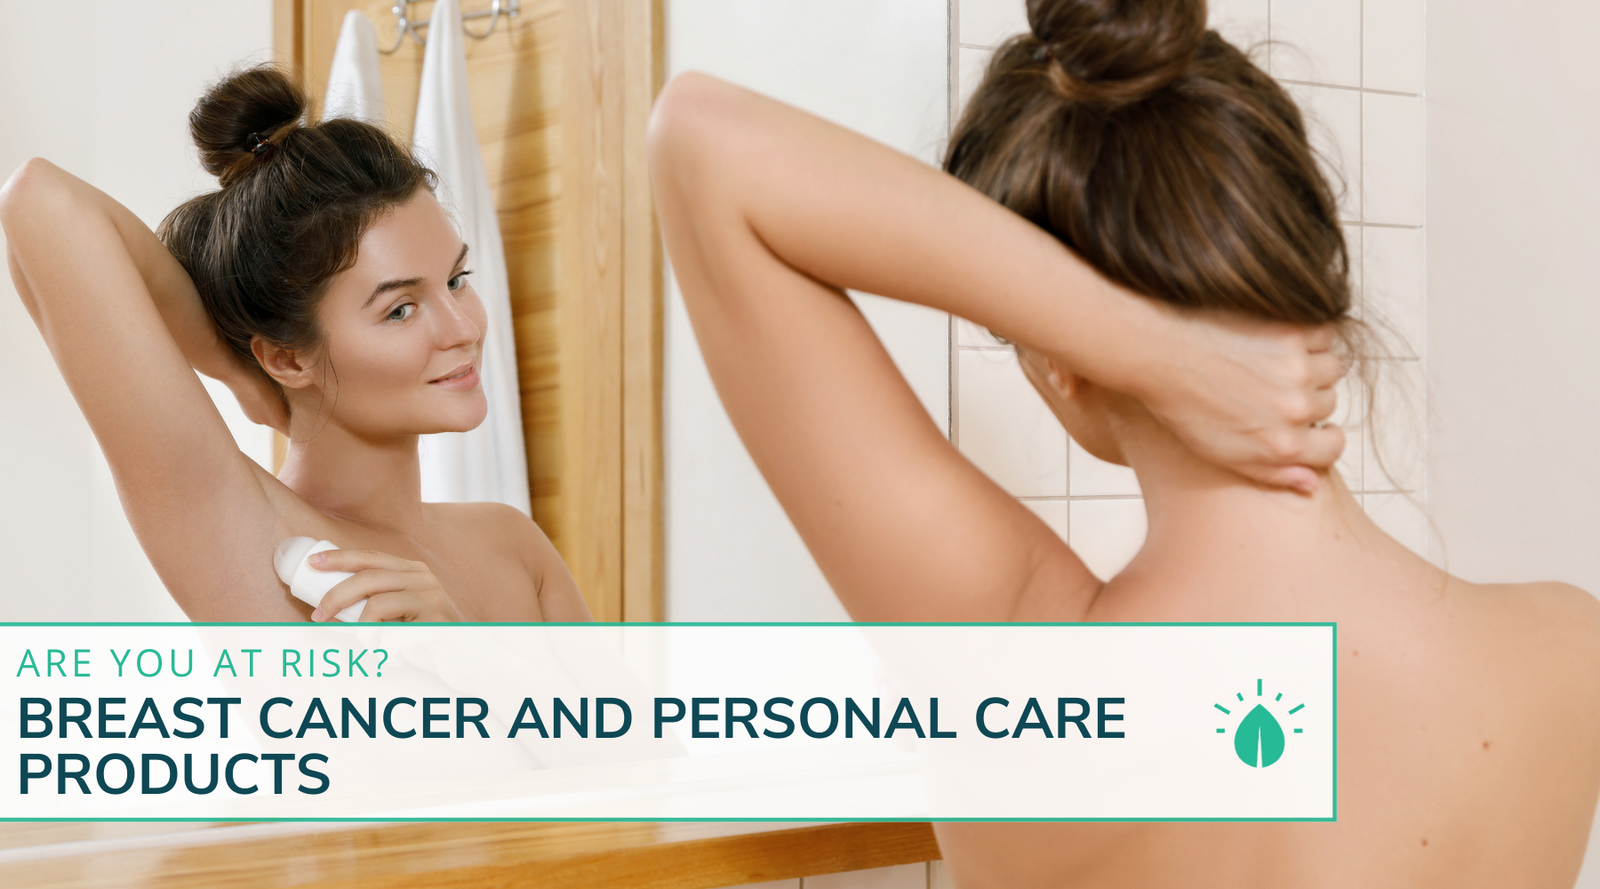 Breast Cancer and Personal Care Products - Are You At Risk?